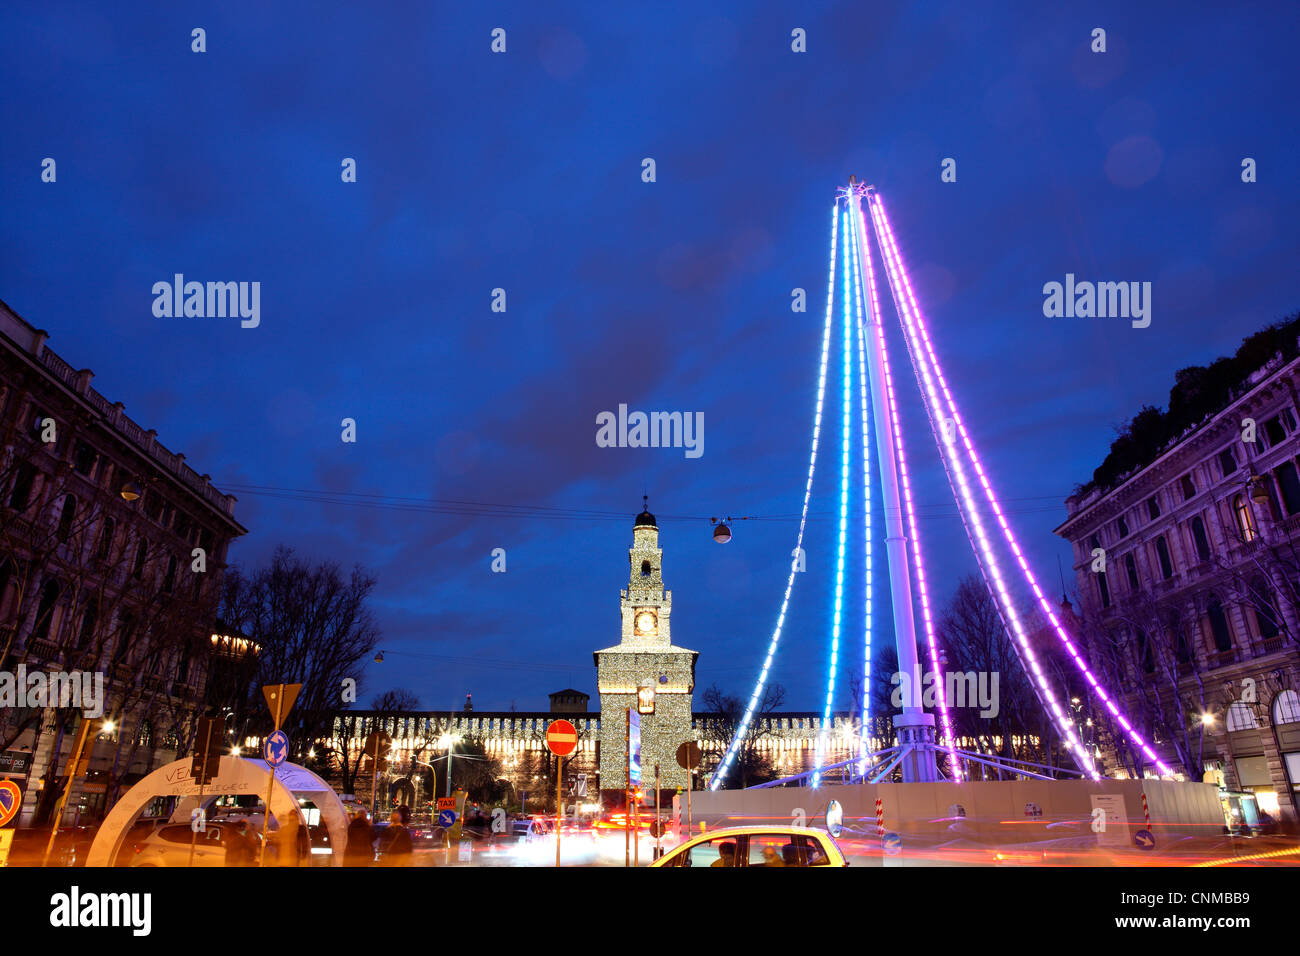 Piazza Castello at Christmas, Milan, Lombardy, Italy, Europe Stock Photo